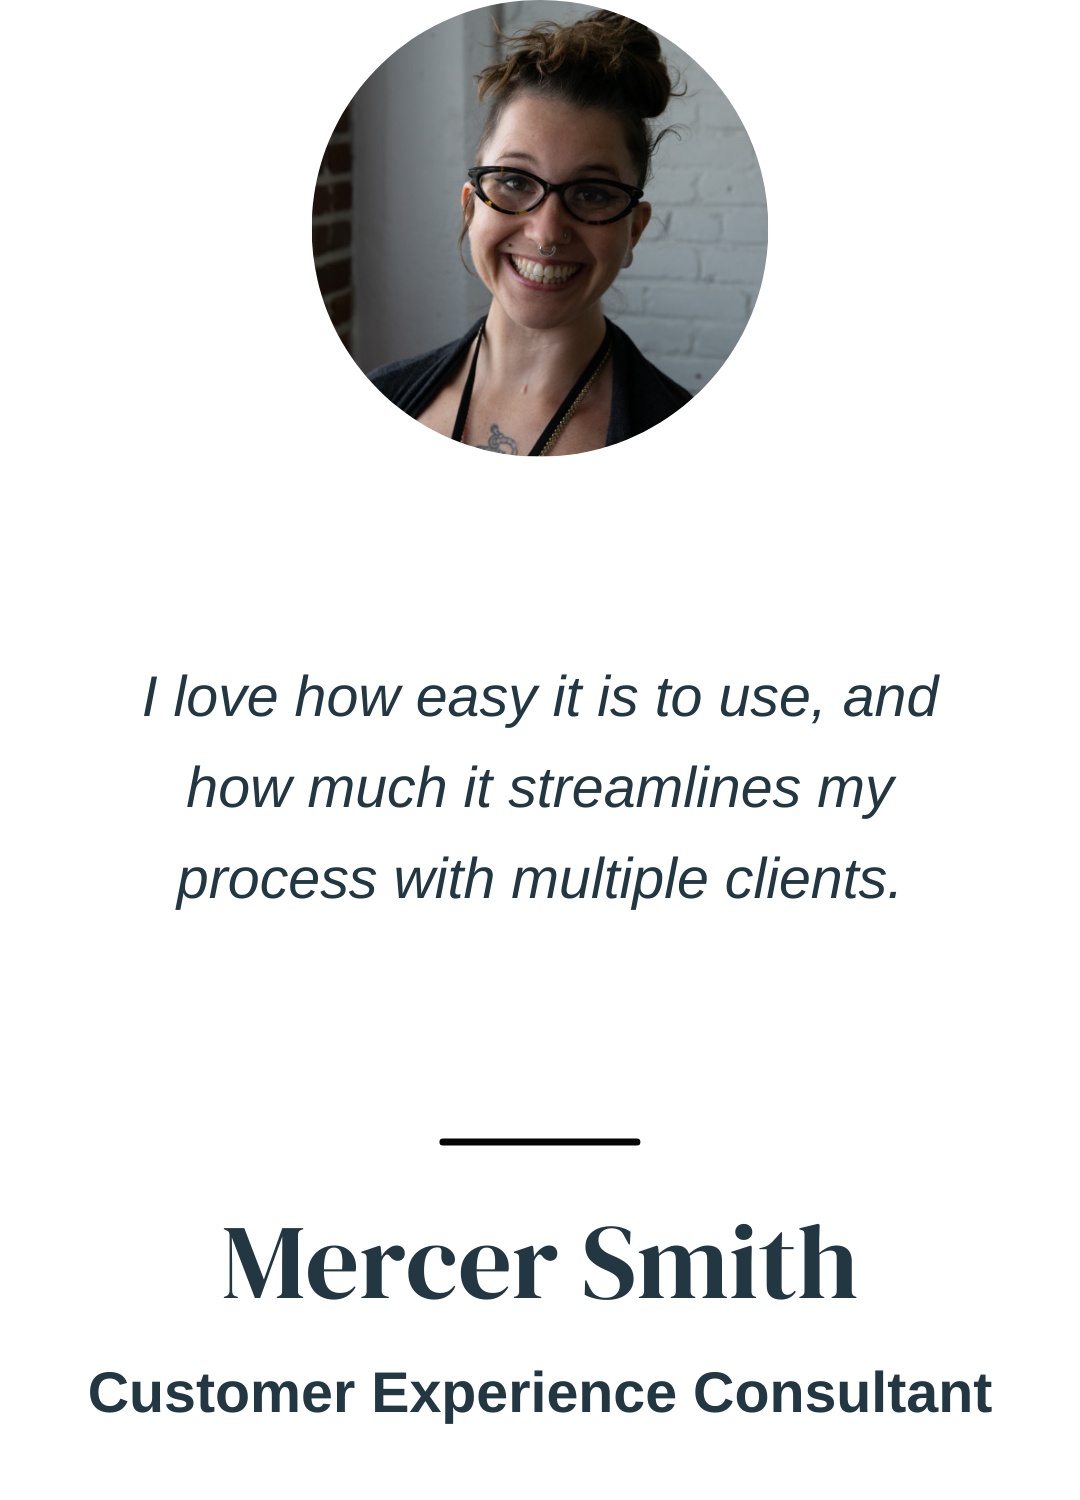 "I love how easy it is to use, and how much it streamlines my process with multiple clients." Mercer Smith, Customer Experience Consultant